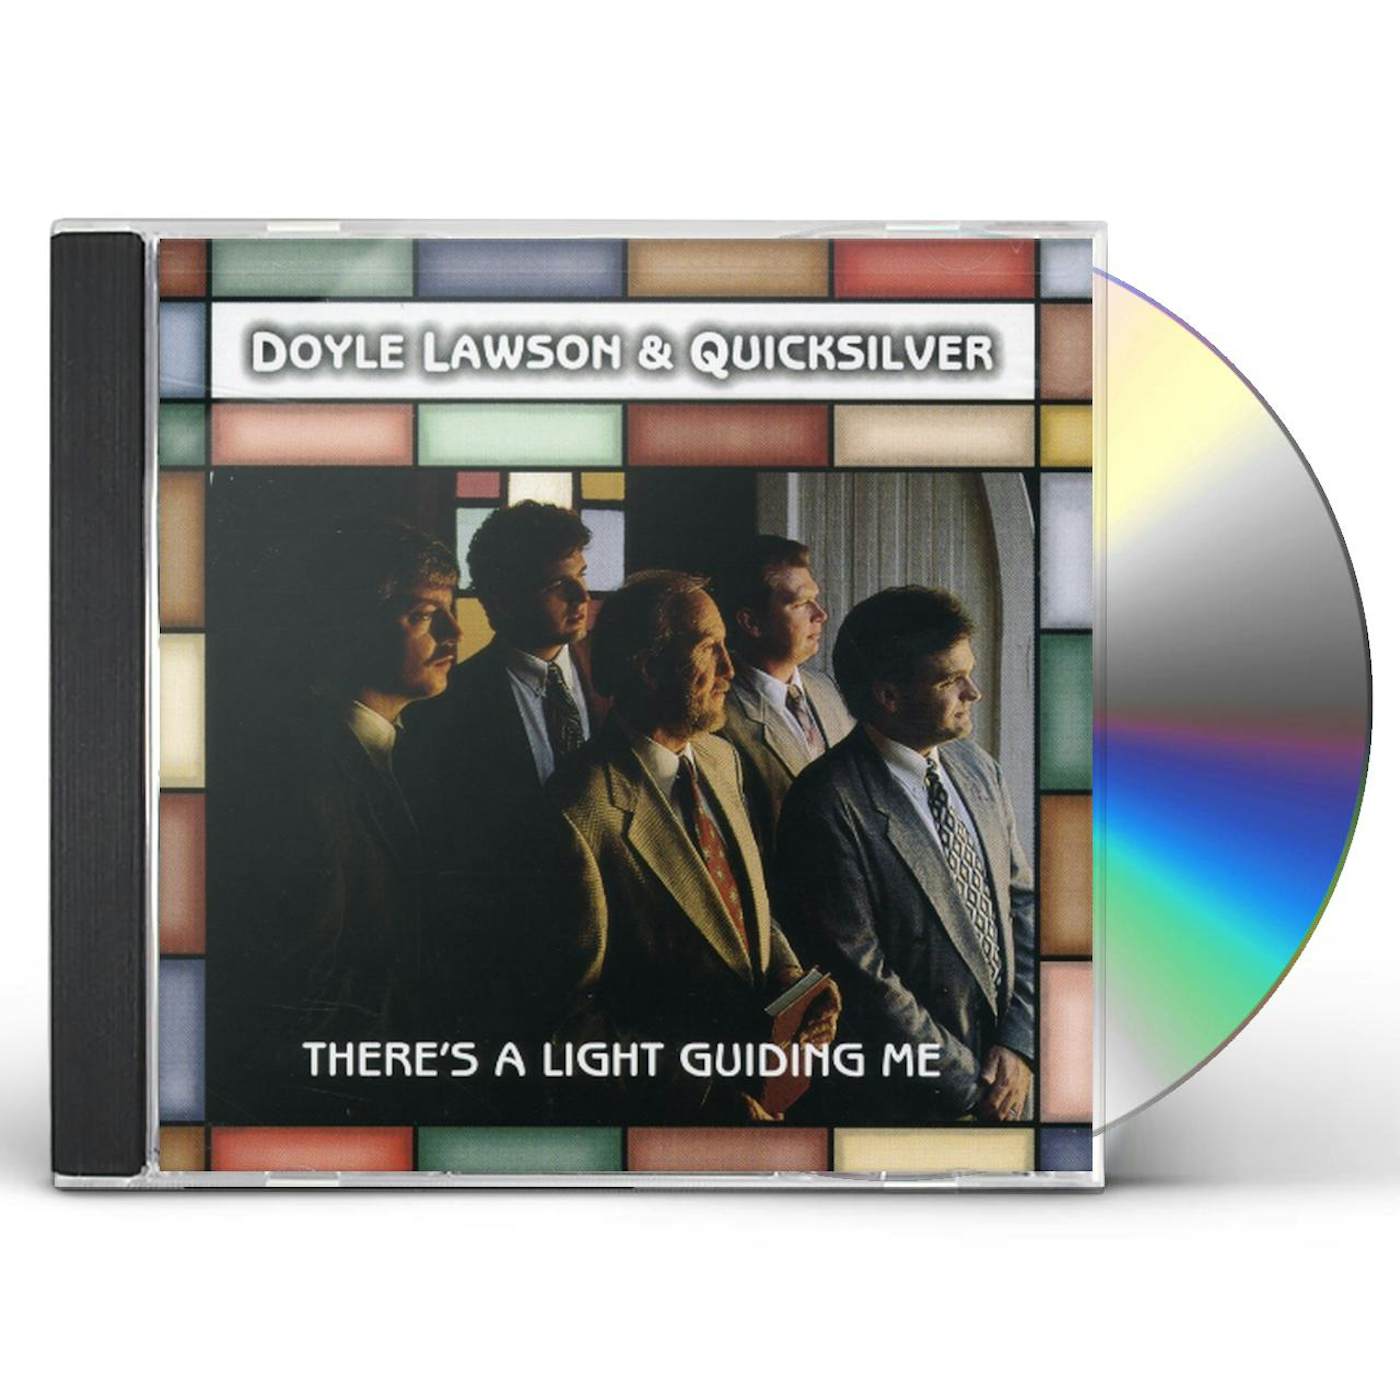 Doyle Lawson & Quicksilver THERE'S A LIGHT GUIDING ME CD